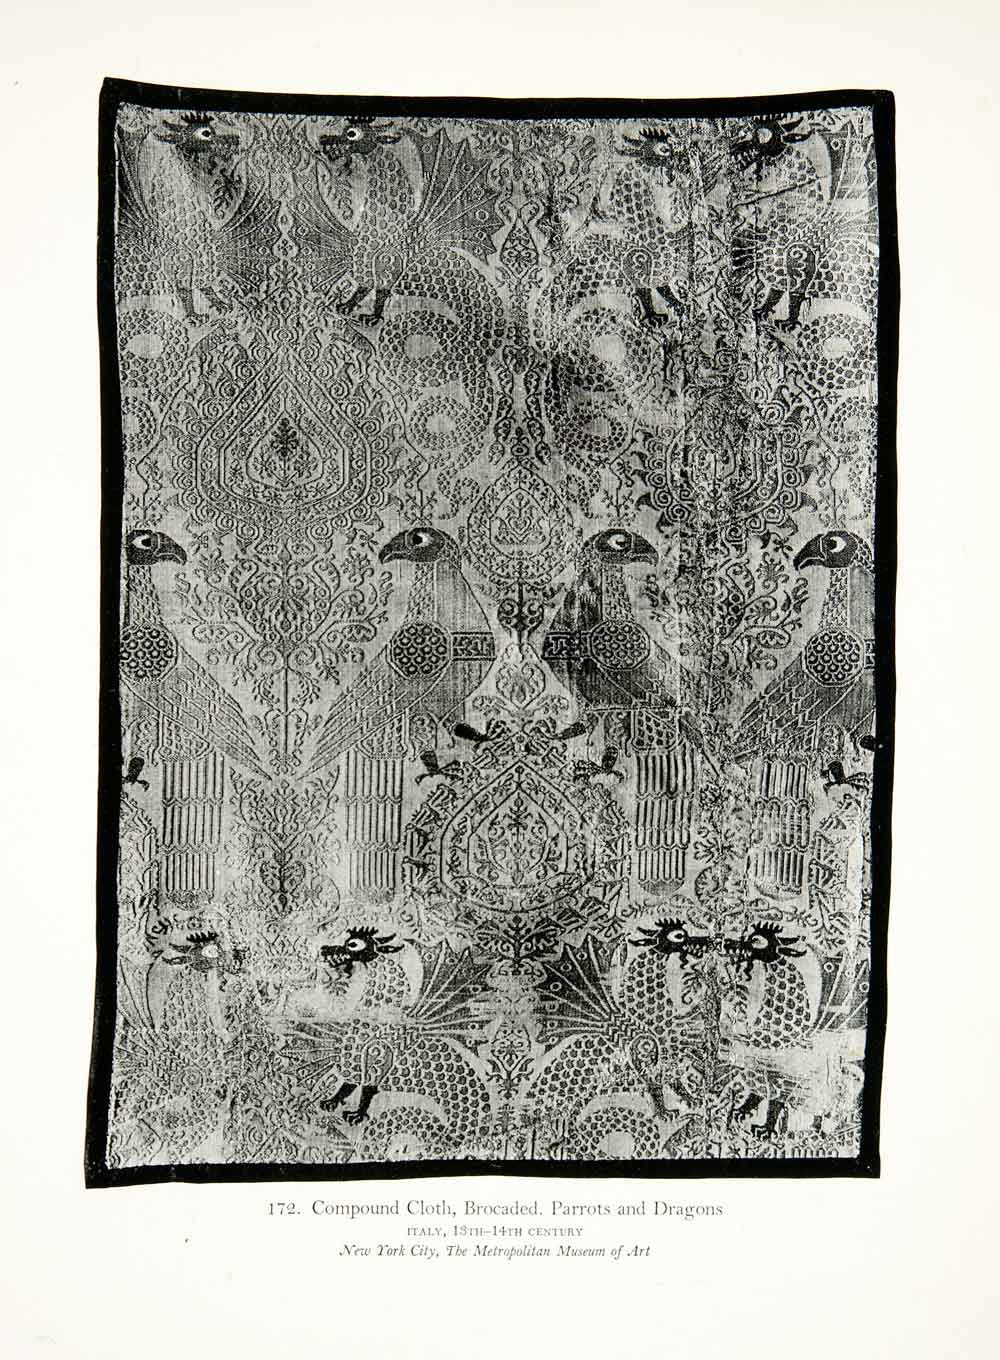 1952 Collotype Brocaded Compound Cloth Textile Parrot Dragon Italy Fabric XDD7 - Period Paper
